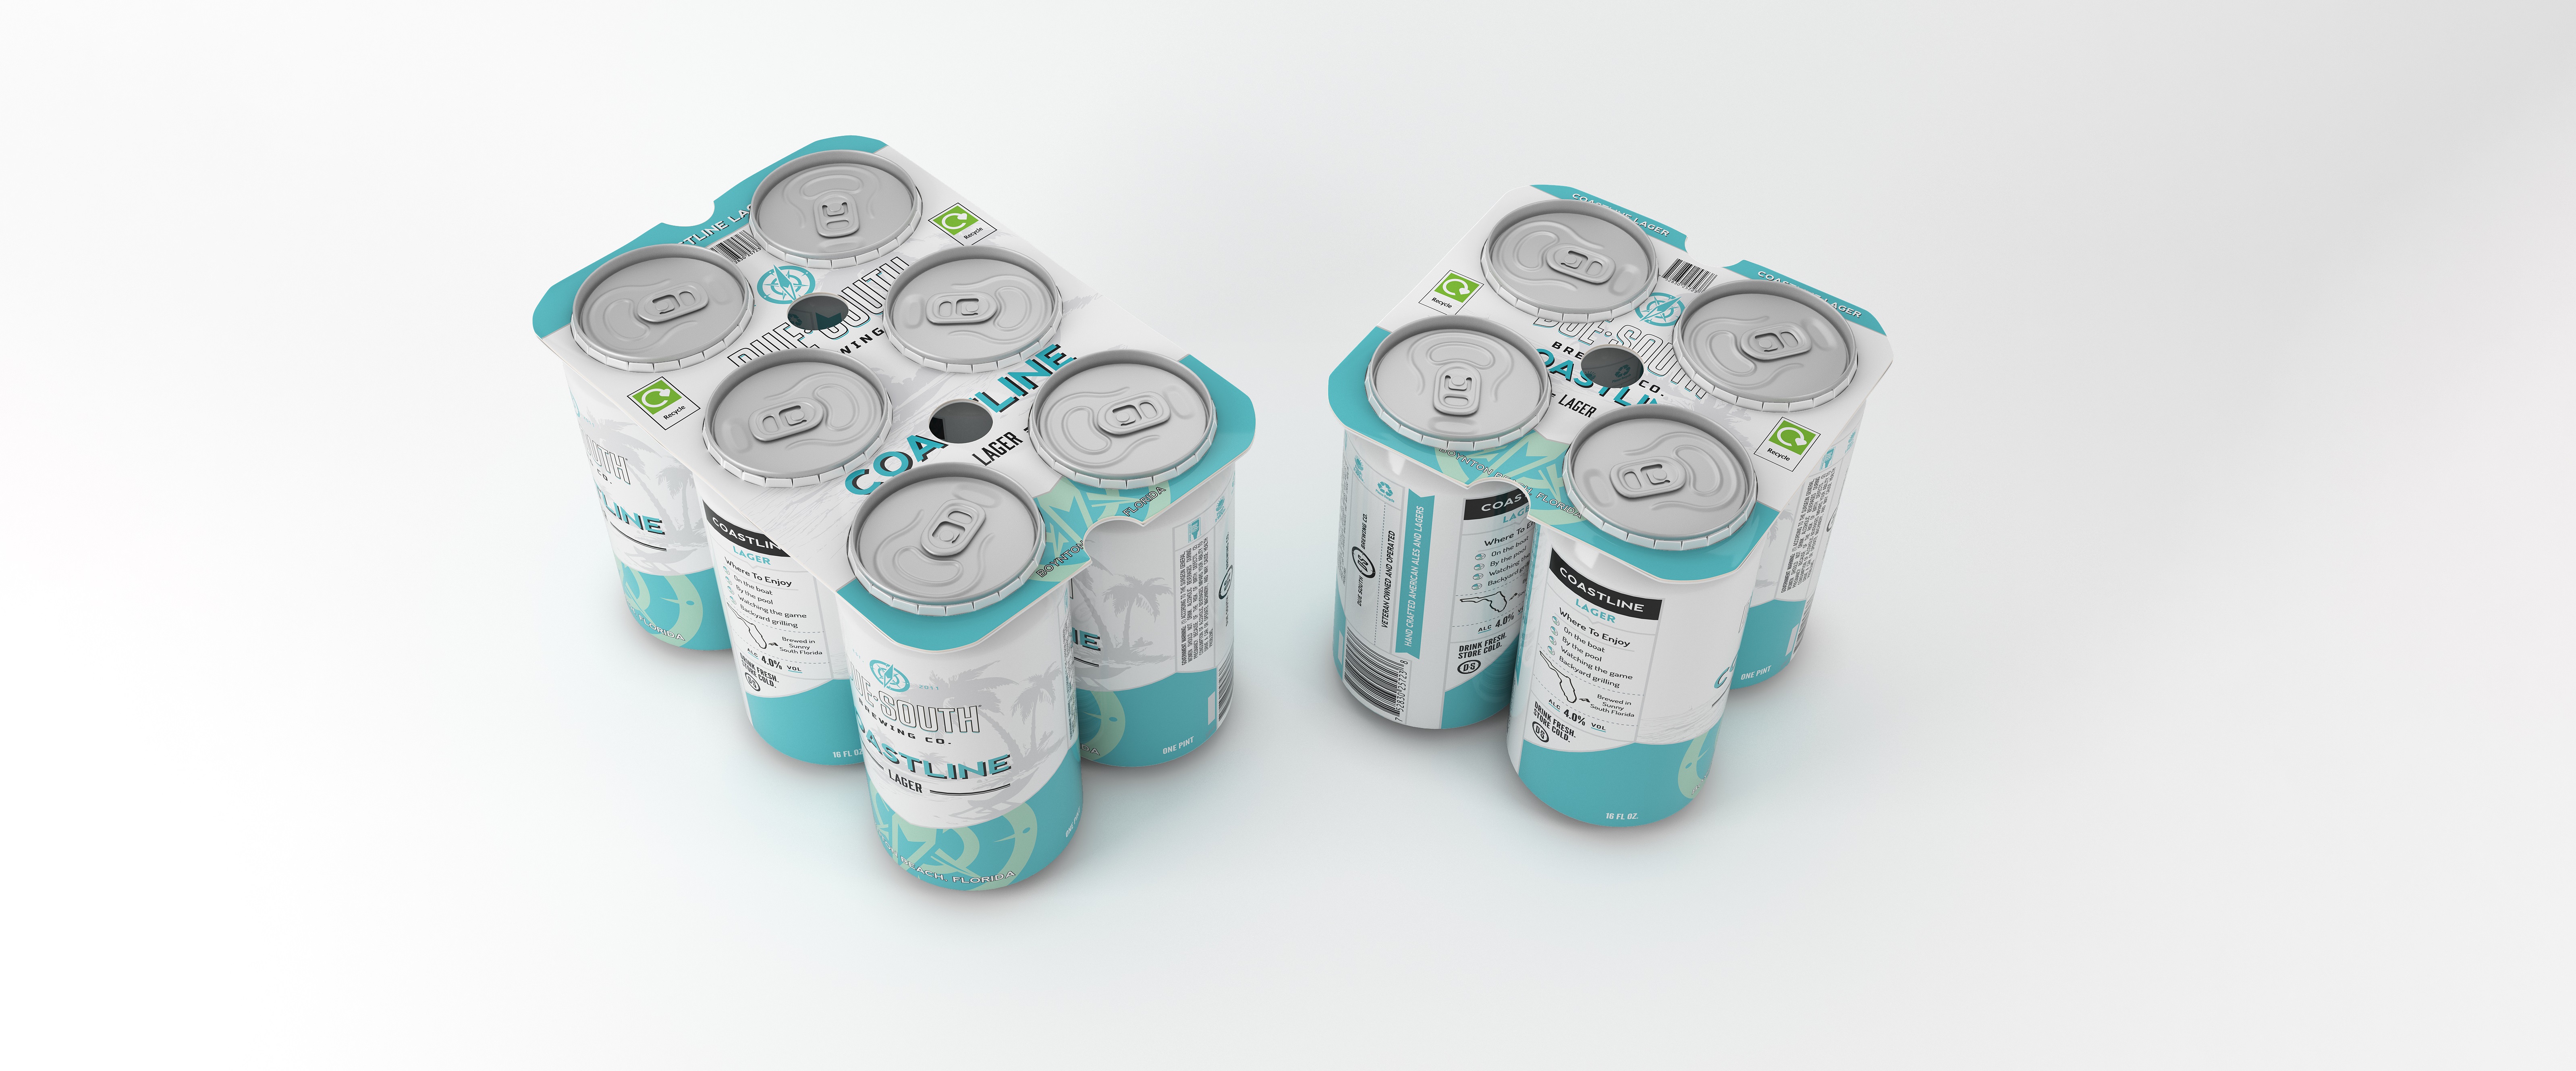 WaveGrip to showcase cardboard carriers at Craft Brewers Conference